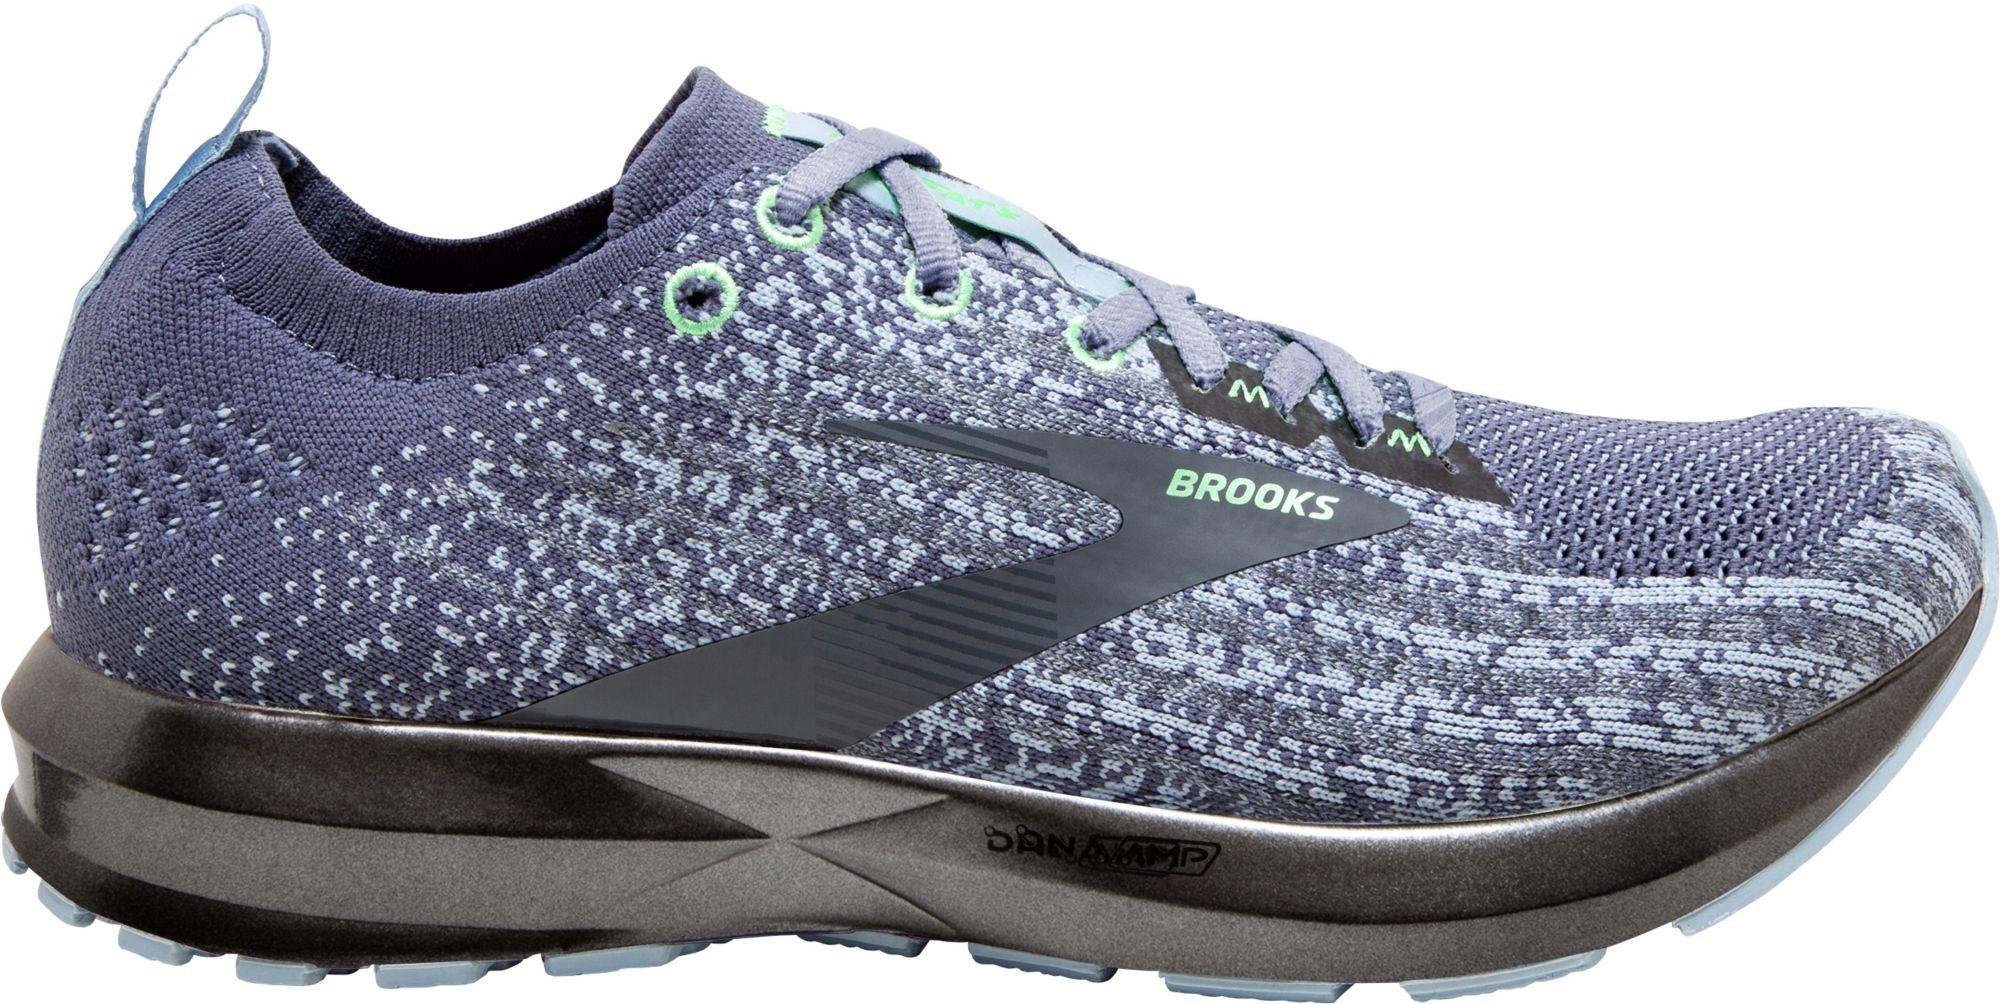 Brooks Running Shoes Coupon - jdesigns4christ